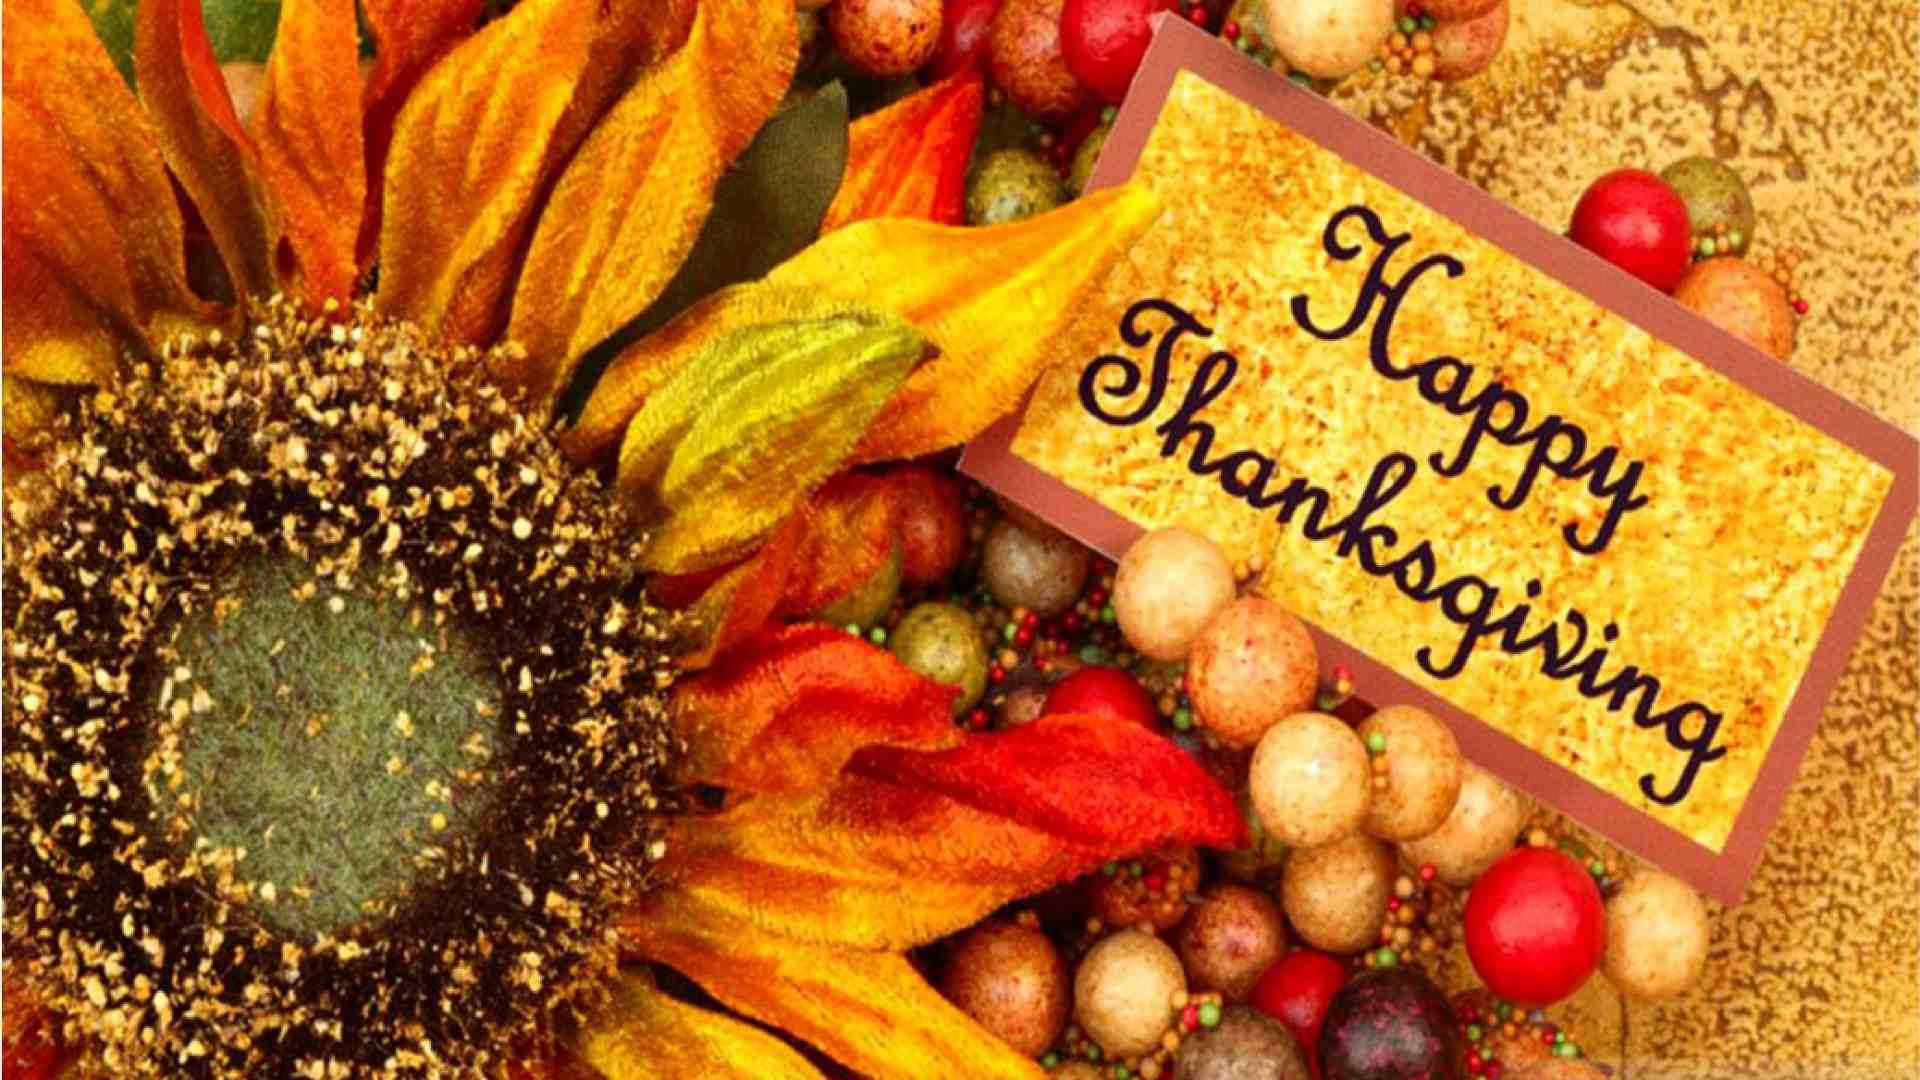 1920x1080 Free download 57 Thanksgiving Scenes Wallpapers on WallpaperPlay [] for your Desktop, Mobile \u0026 Tablet | Explore 69+ Thanksgiving 2015 Wallpaper | Free Thanksgiving Wallpapers, Happy Thanksgiving Wallpaper, Thanksgiving Wallpaper Background